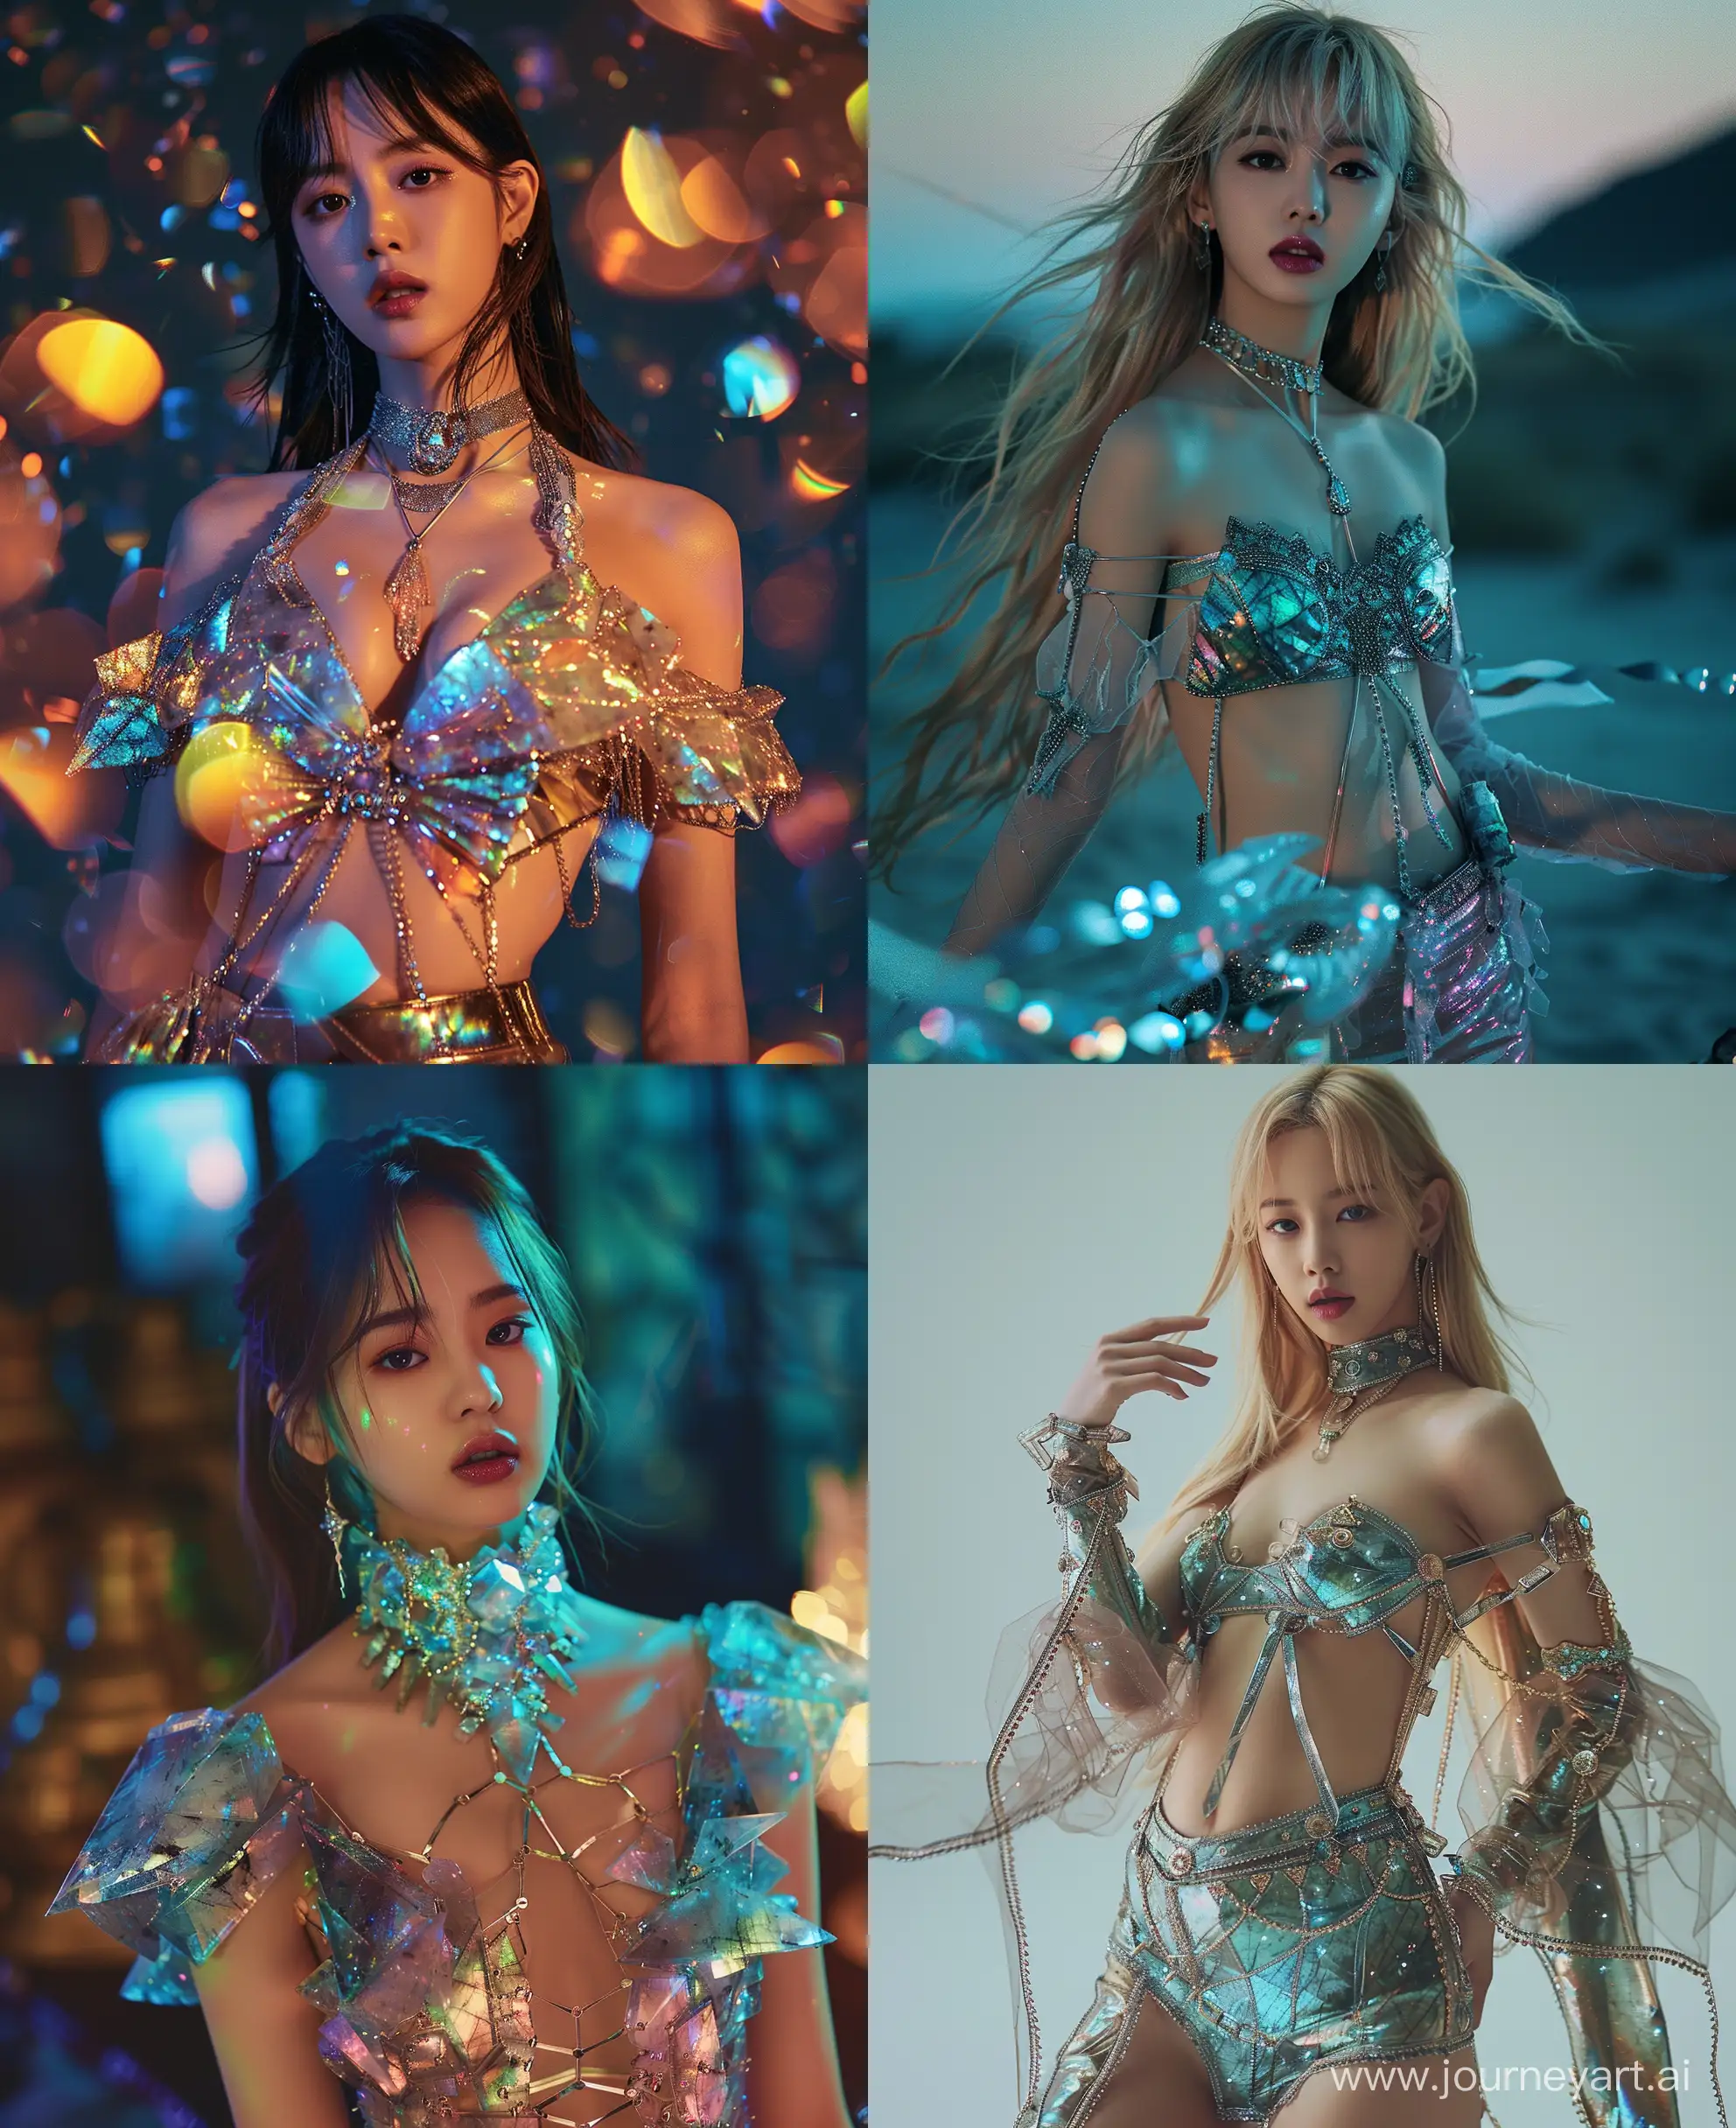 High resolution fashion photo of a beautiful lisa,jennie,jihyoo blackpink's, full body shot, wearing a crystal outfit made of Labradorite, super casual, everyday attire, in the style of lisa,jennie, jihyoo, mysterious nocturnal scenes, album covers, flickr --ar 103:126 --style raw --stylize 250 --v 6